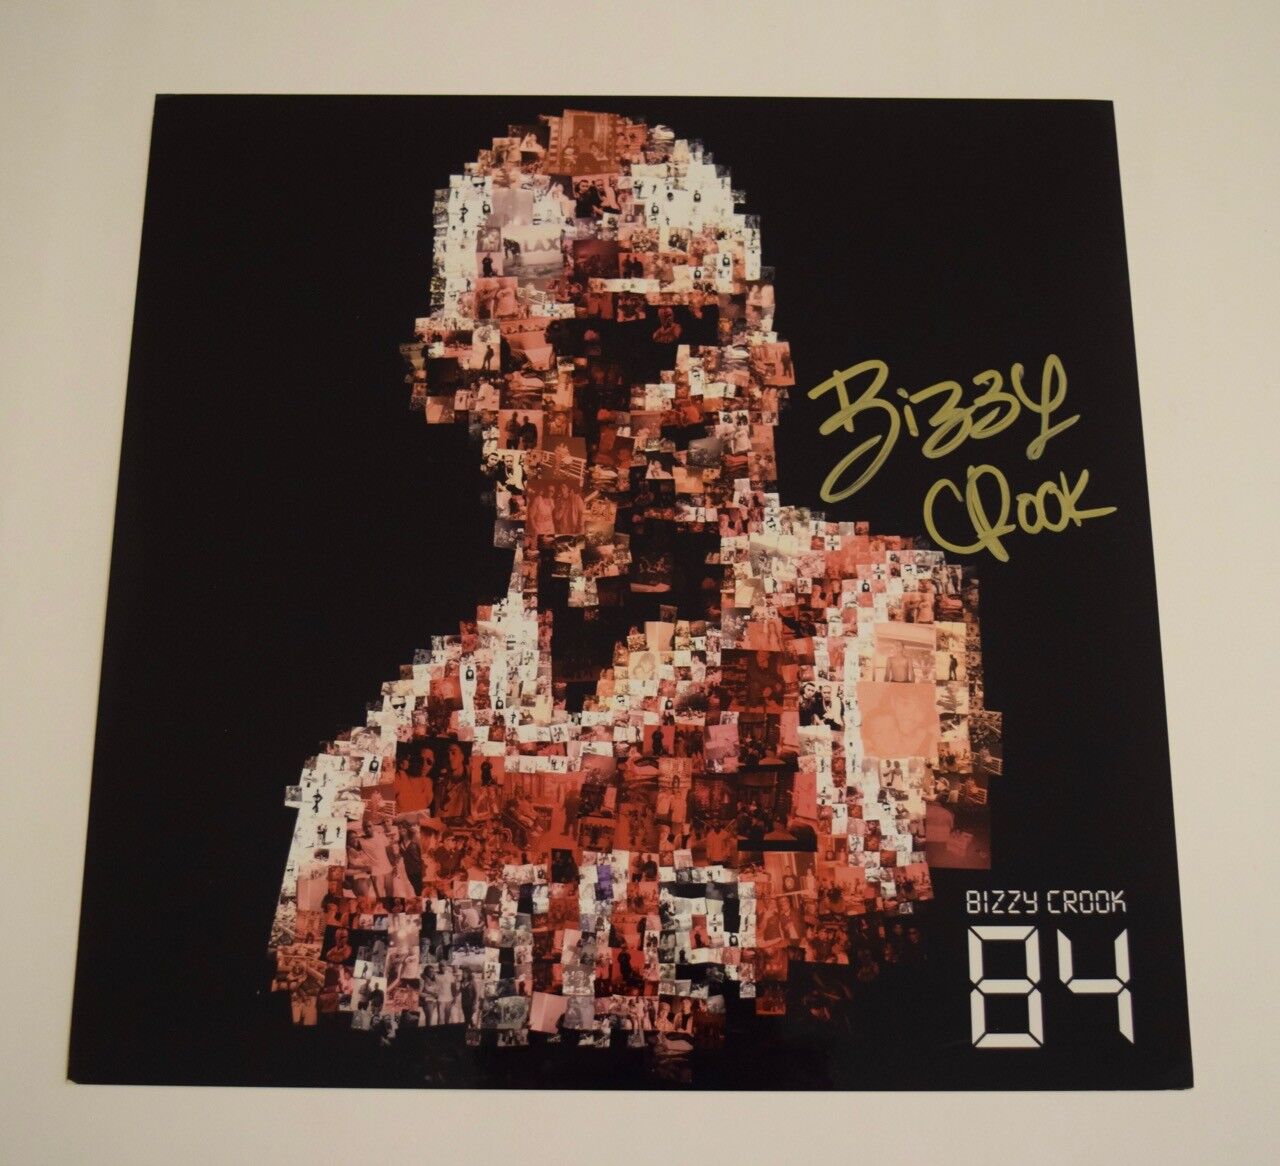 Bizzy Crook Signed Autographed 84 12x12 Album Flat Photo Poster painting COA VD